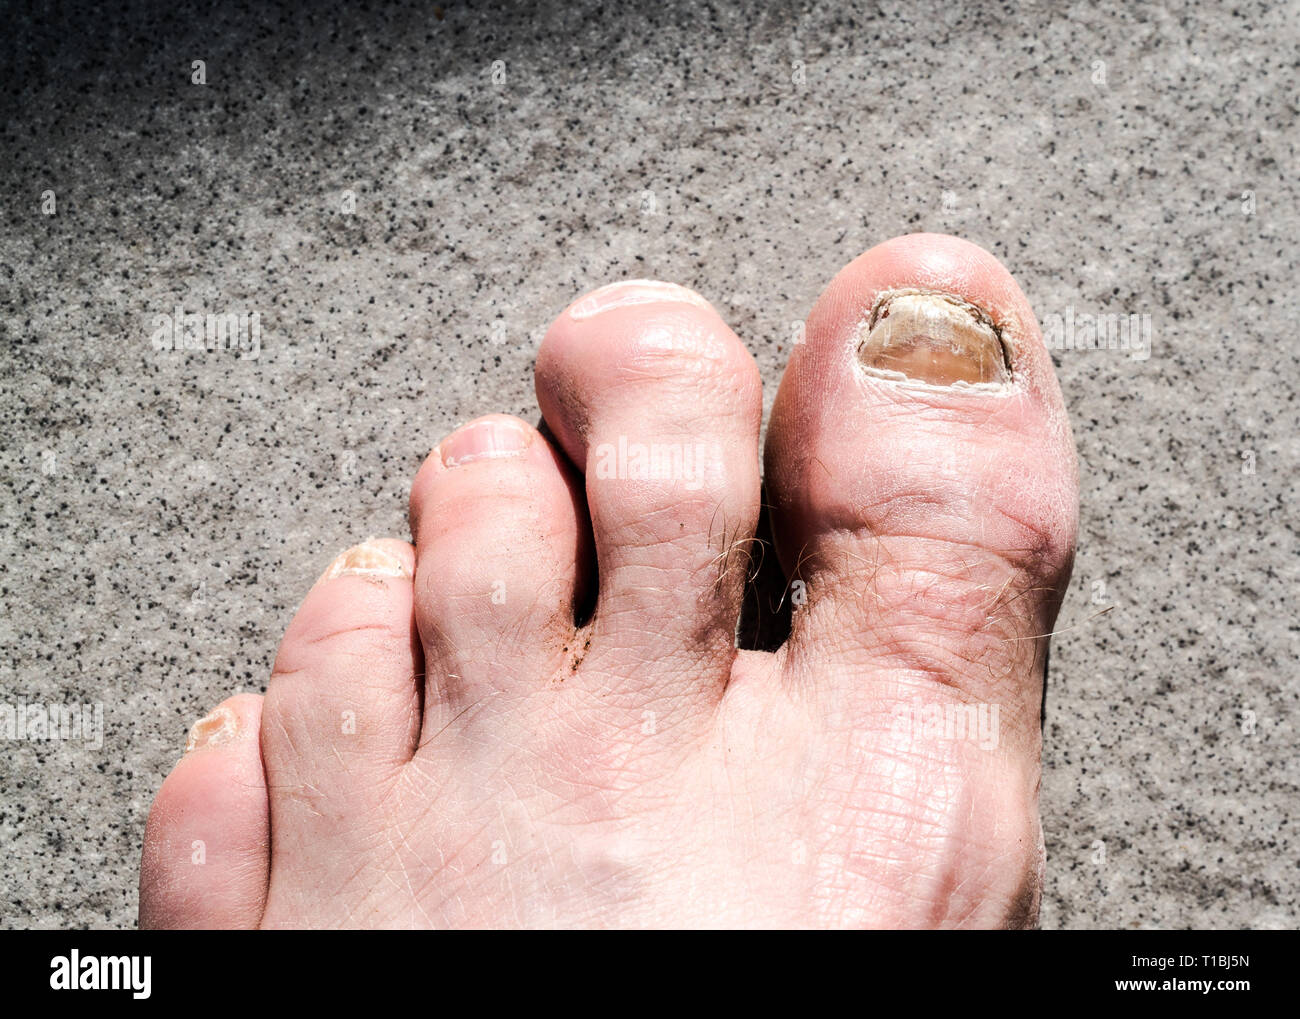 detail view of ugly male feet and toes affected by toe nail fungus and arhtritic hammertoes Stock Photo